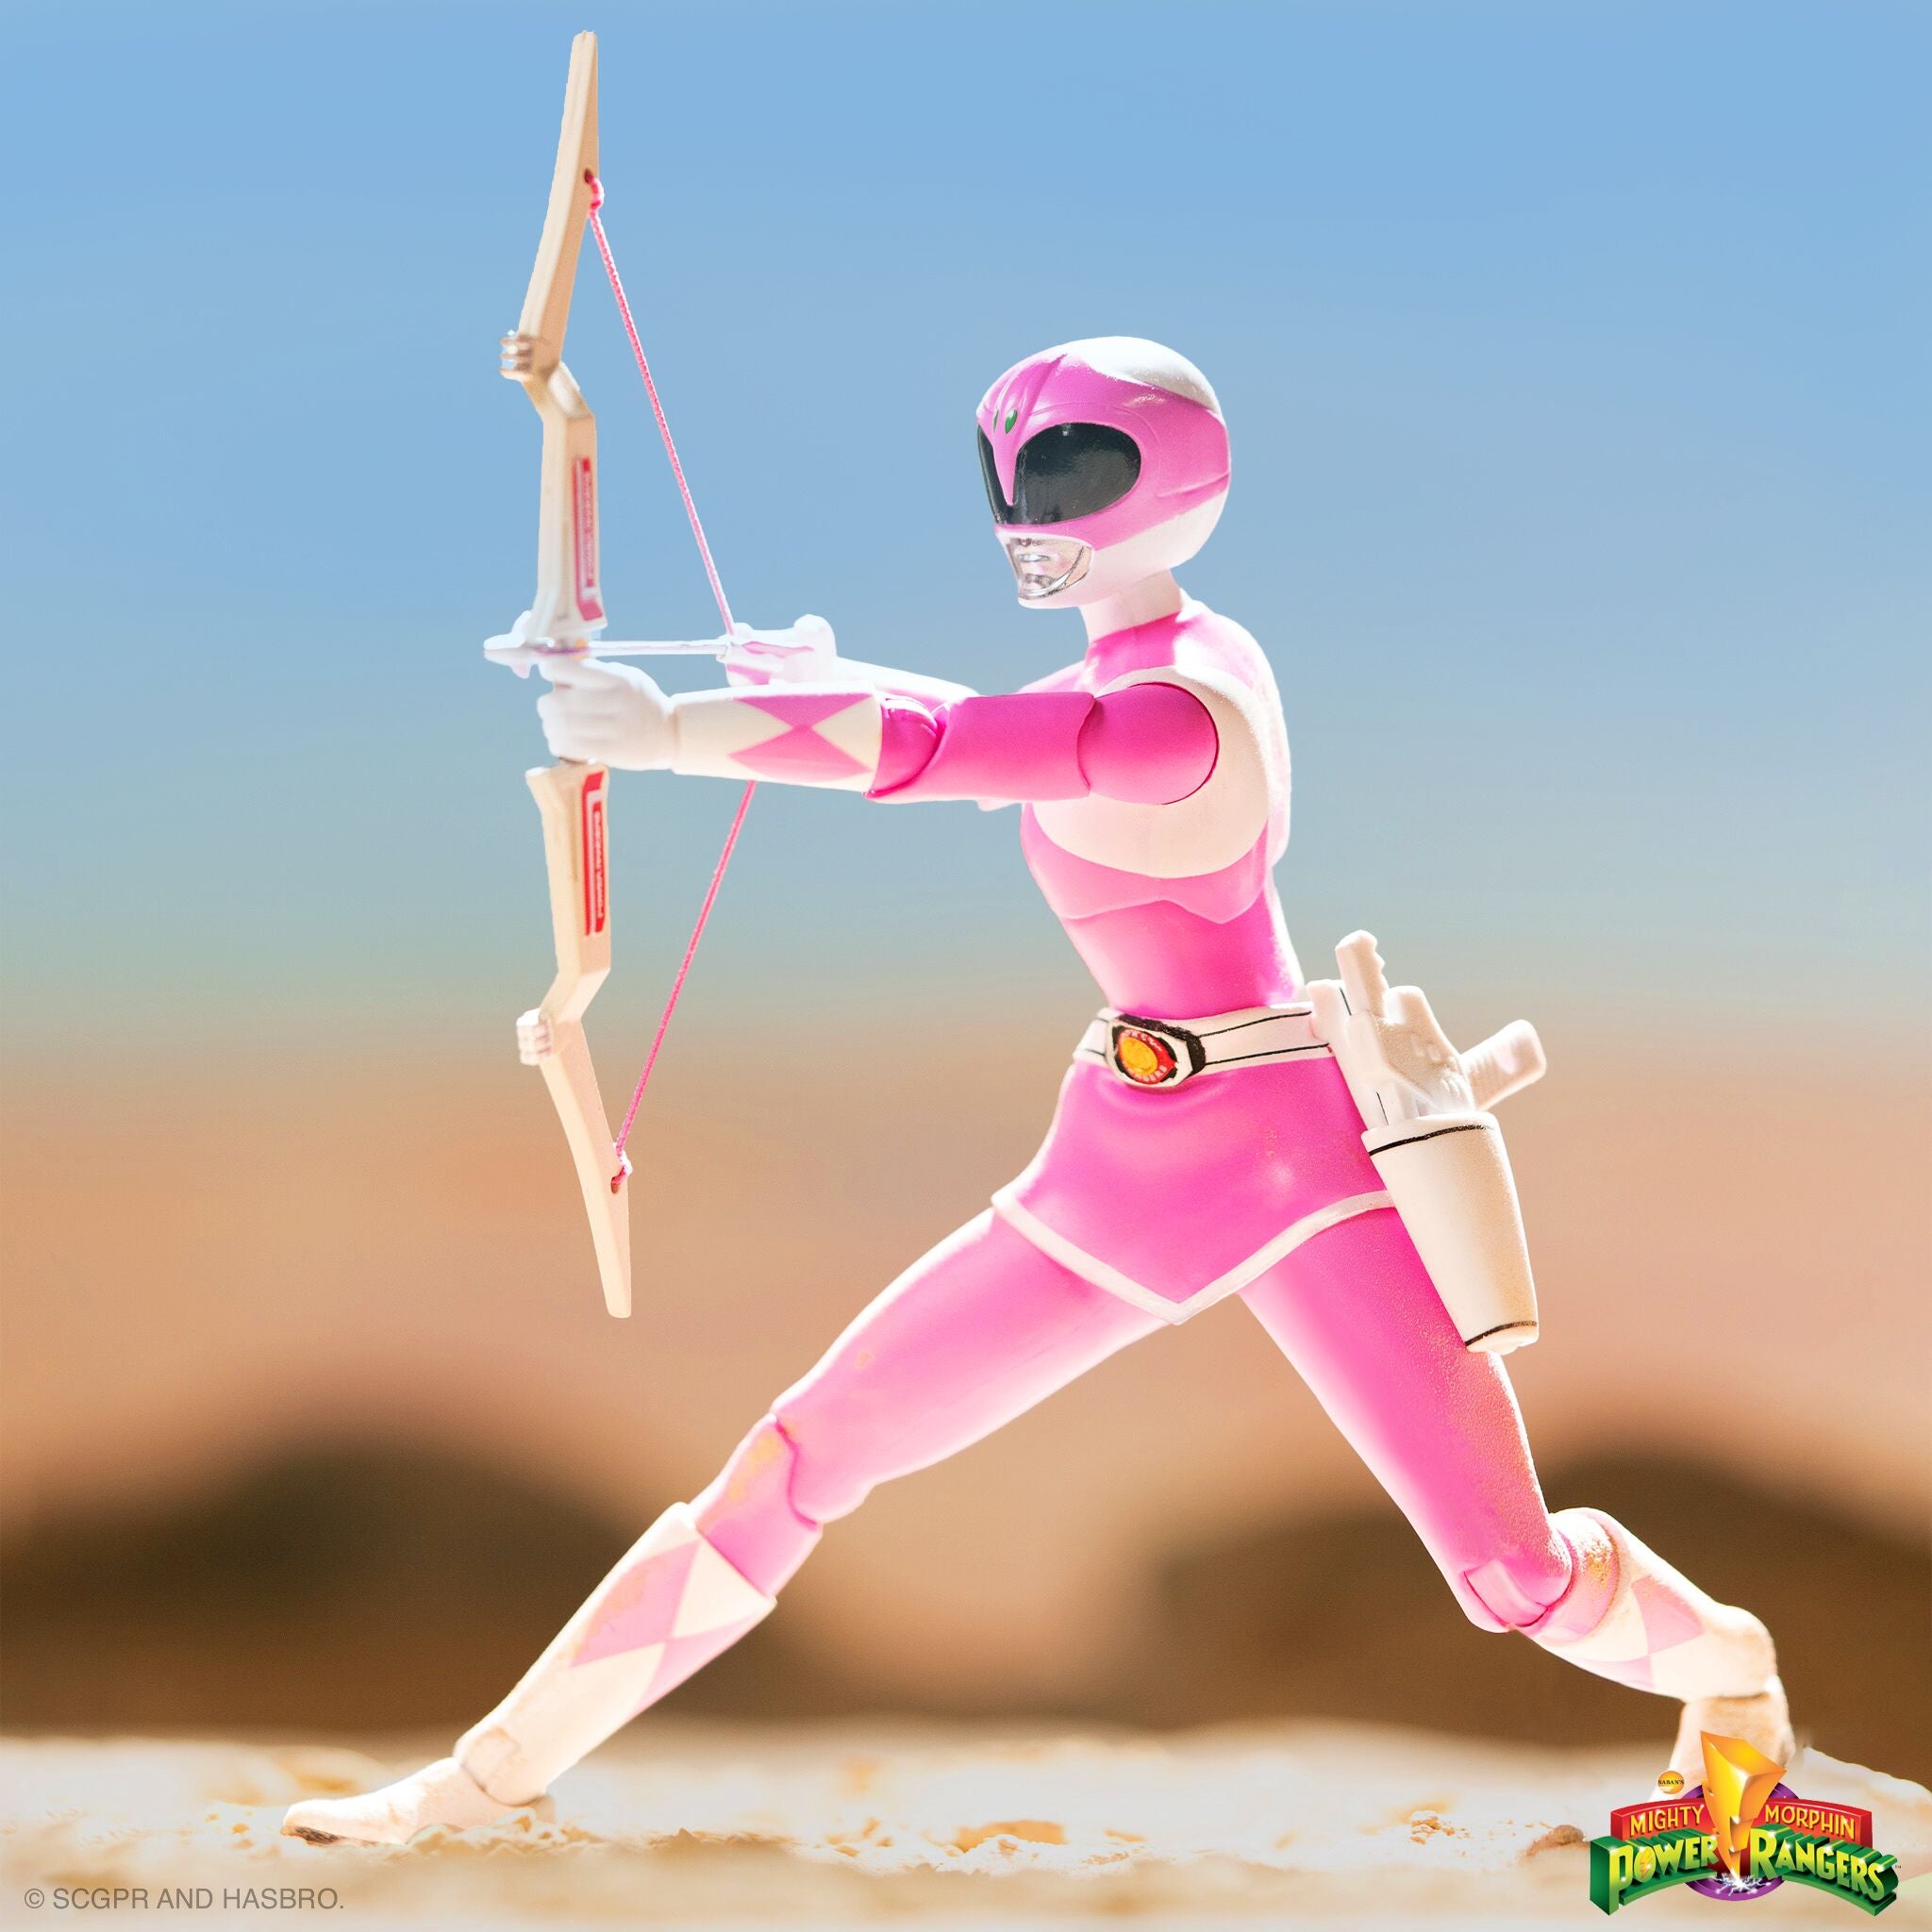 Mighty Morphin Power Rangers ULTIMATES! Wave 2 - Pink Ranger